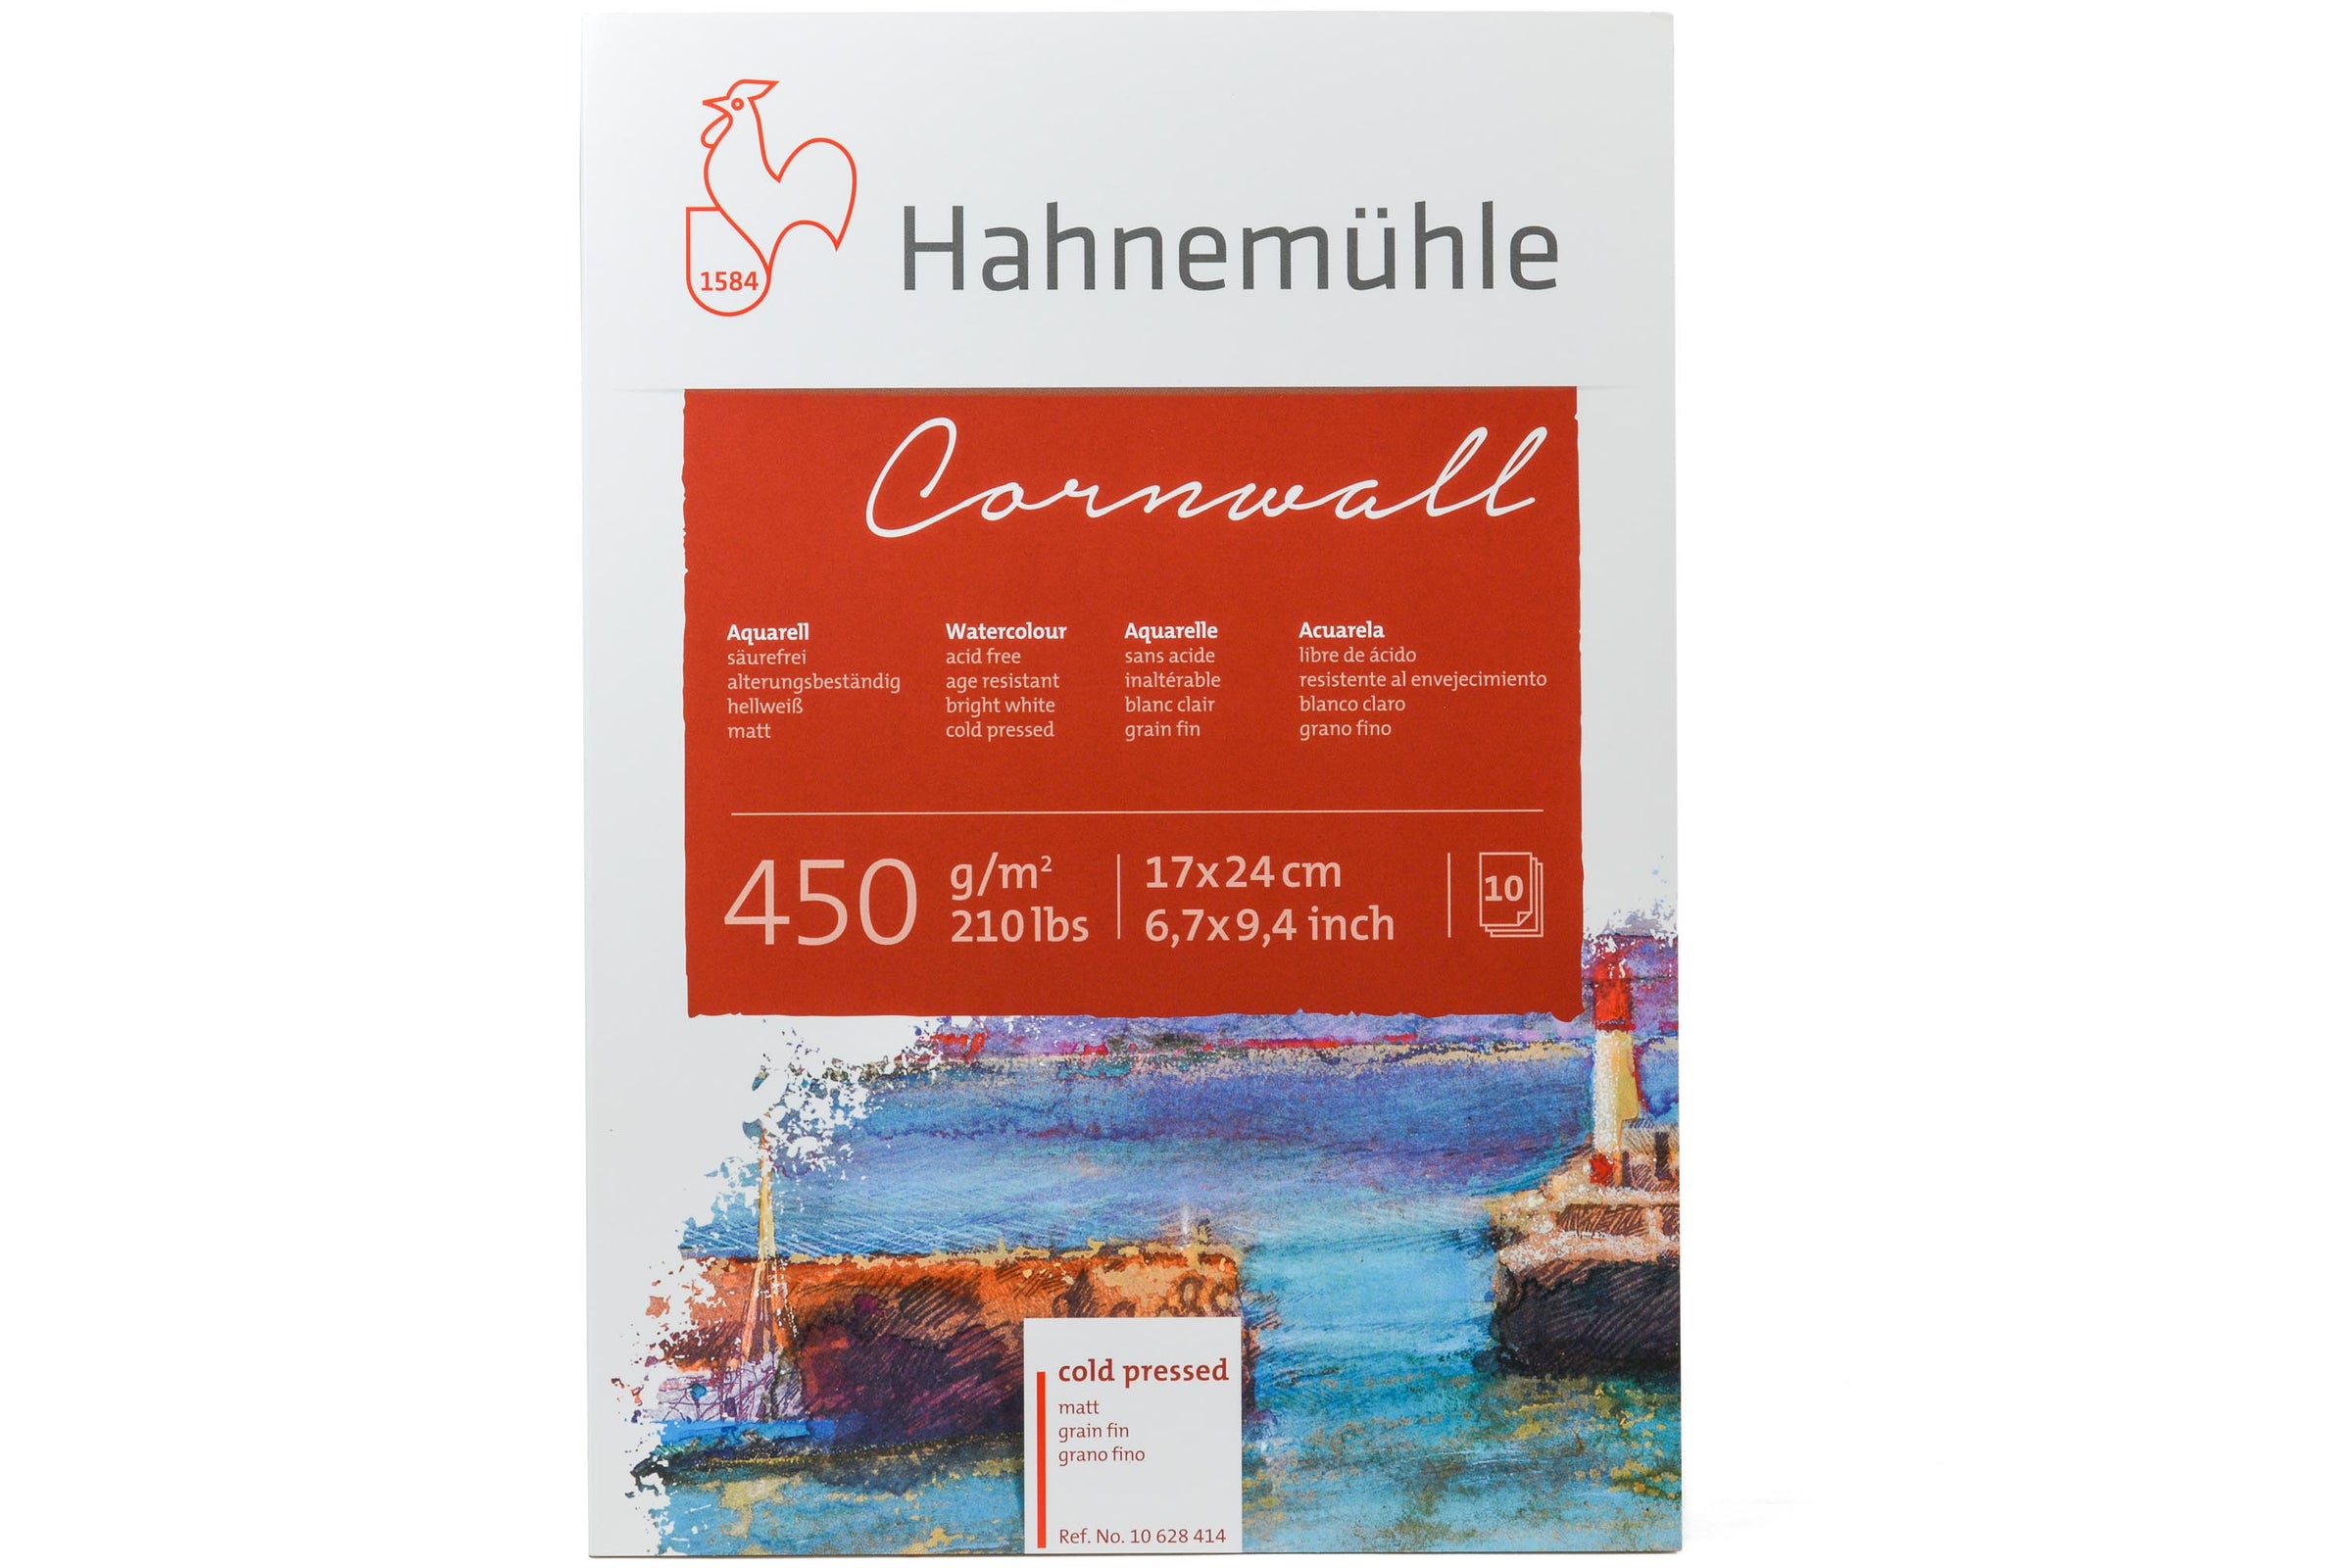 Hahnemuhle Collection Watercolor Paper